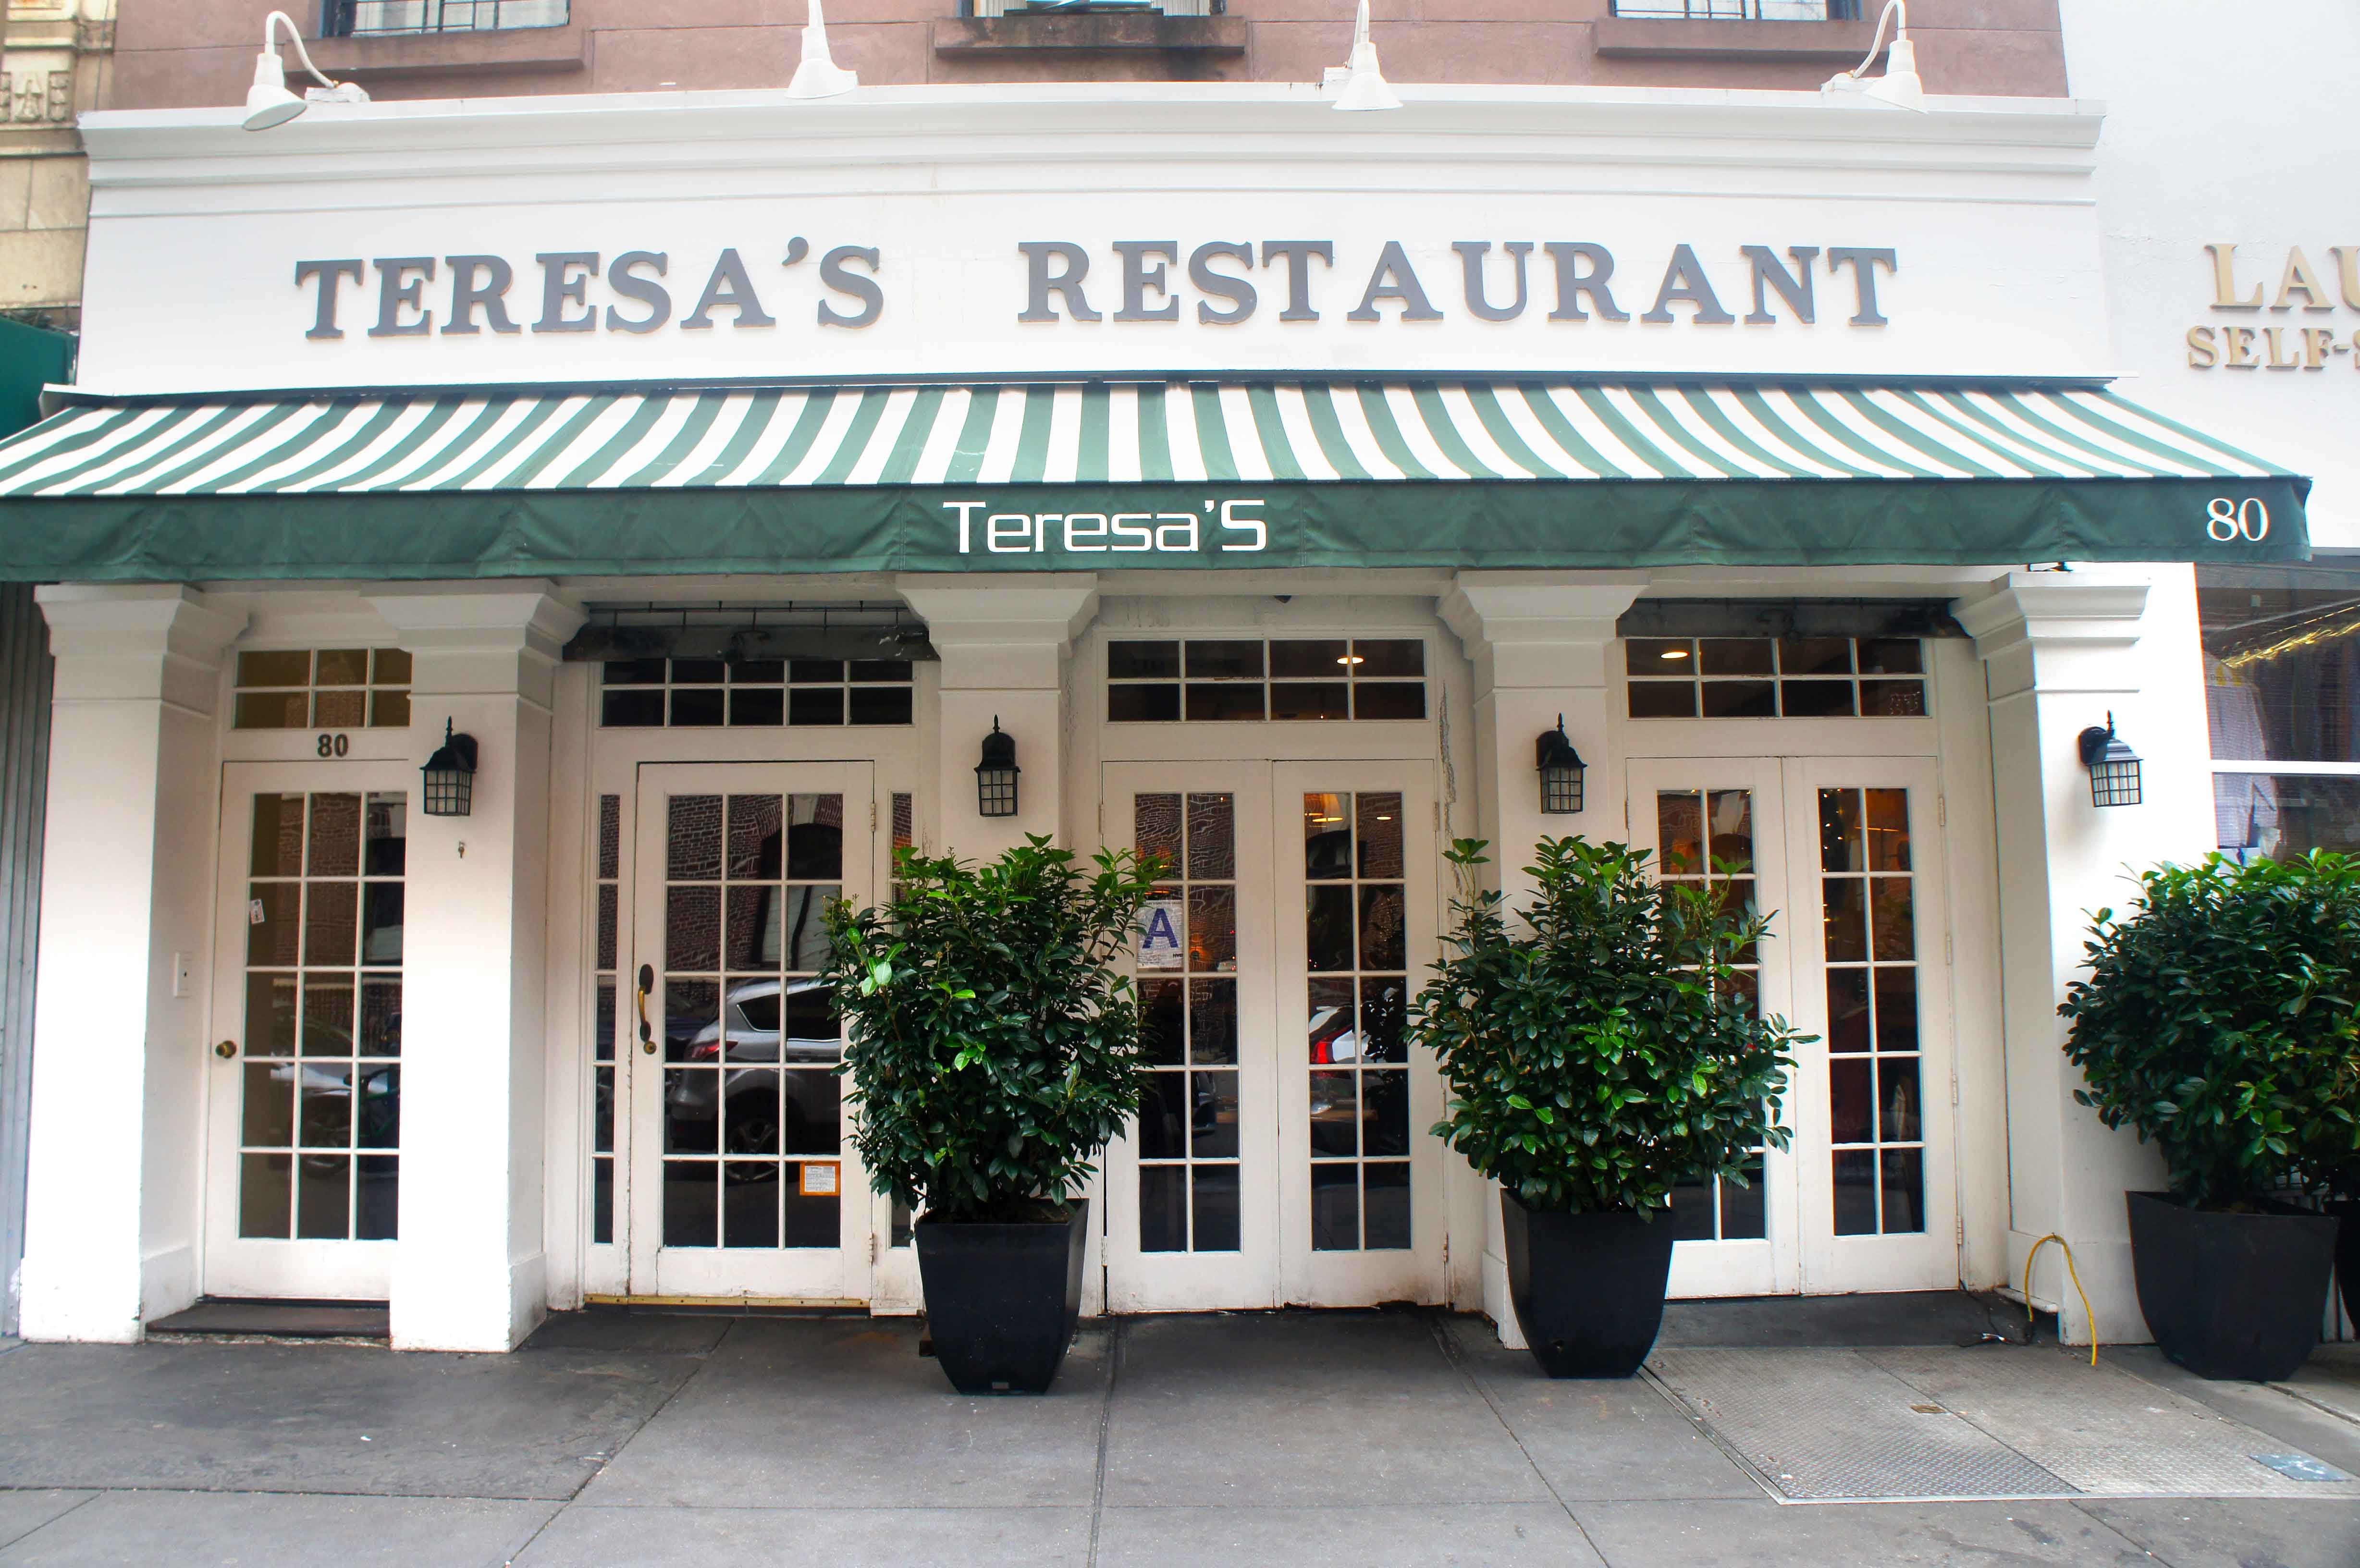 Brooklyn Heights locals love stopping into Teresa’s Restaurant, a well-known coffee shop and diner-like eatery near the Promenade, serving traditional Polish fare